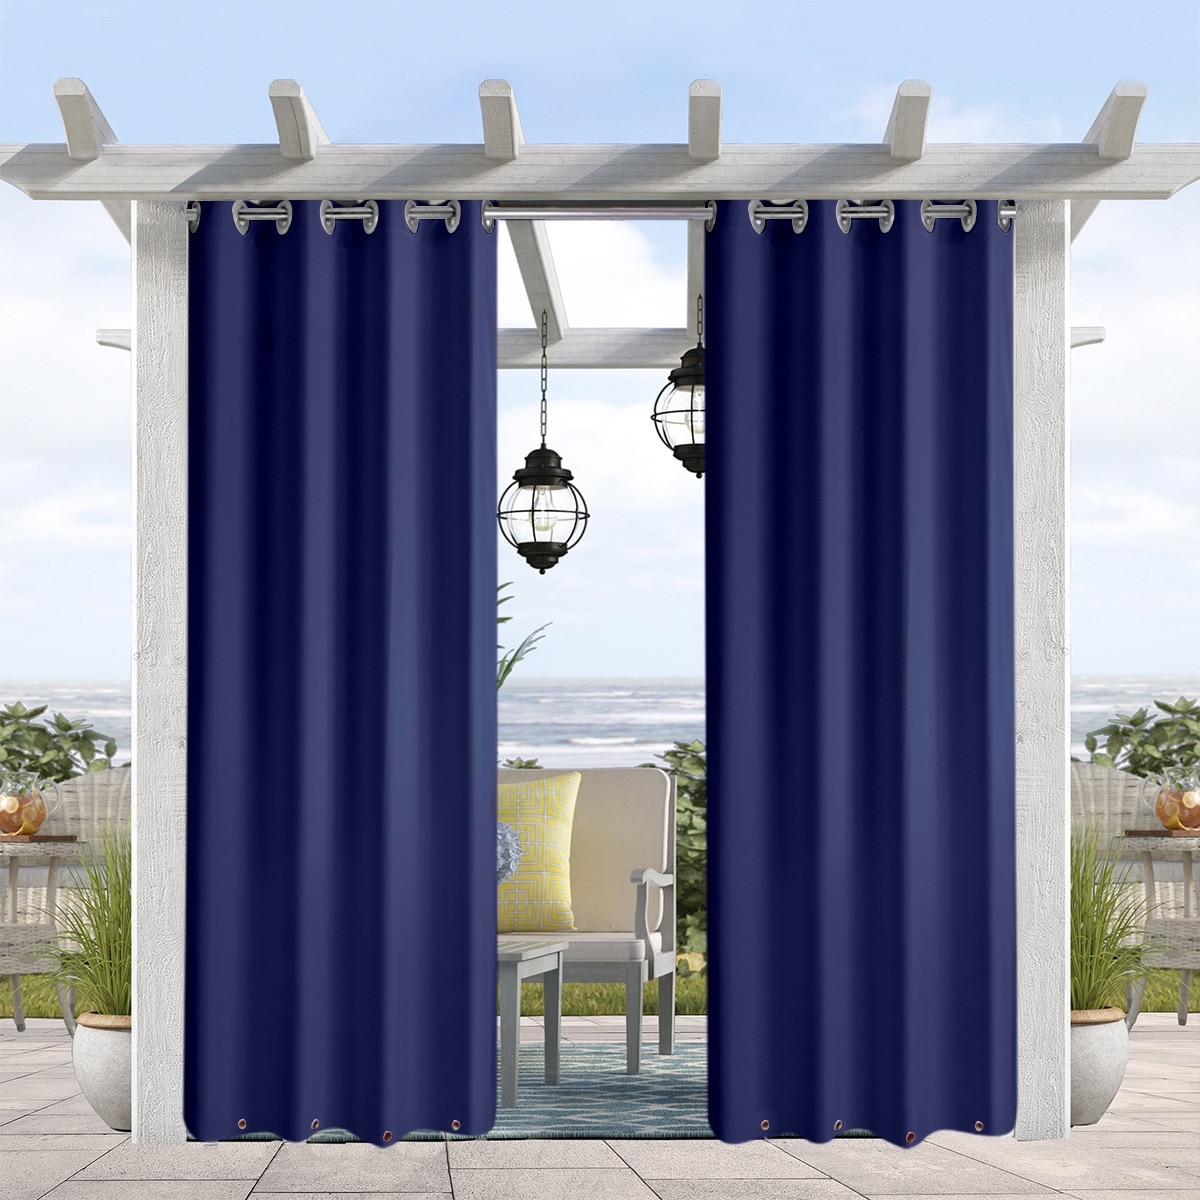 Pro Space Waterproof Blackout Outdoor Curtains, To...